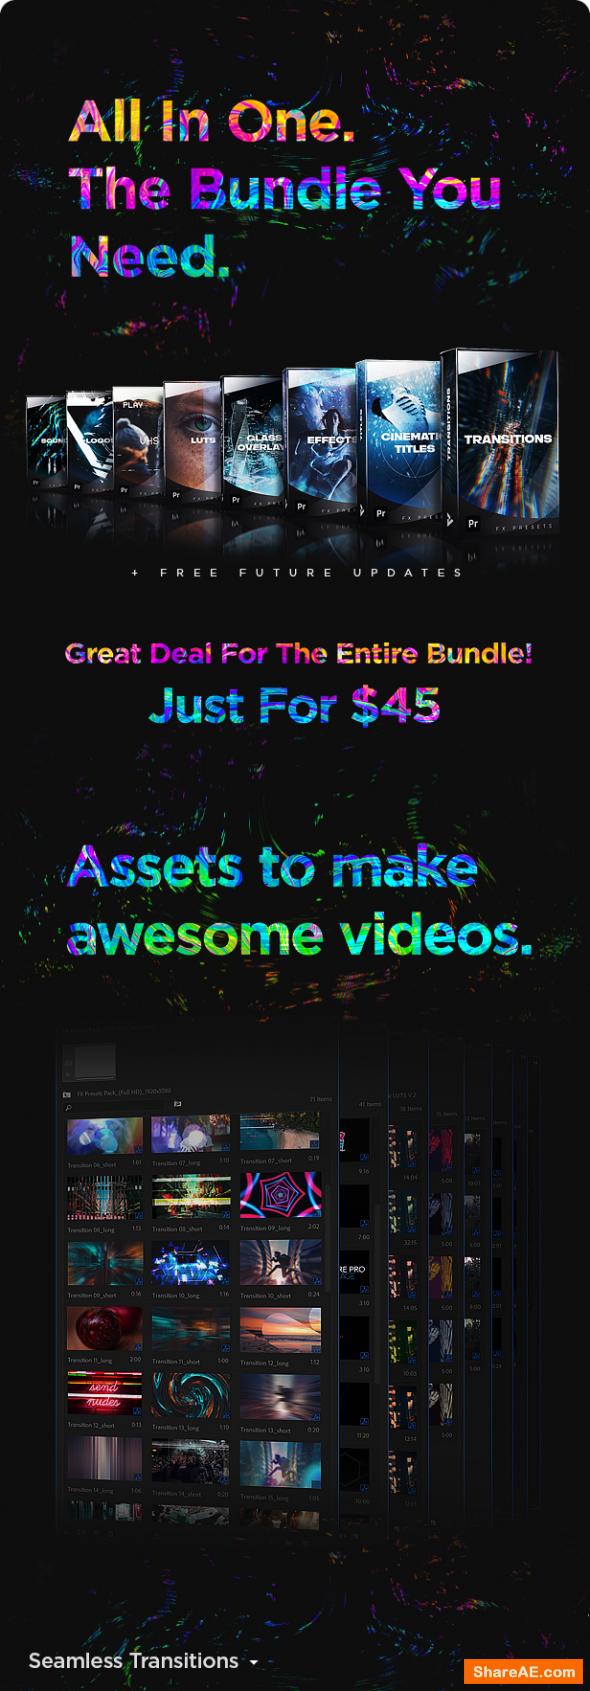 Videohive Presets Pack for Premiere Pro: Effects, Transitions, Titles, LUTS, Duotones, Sounds v7